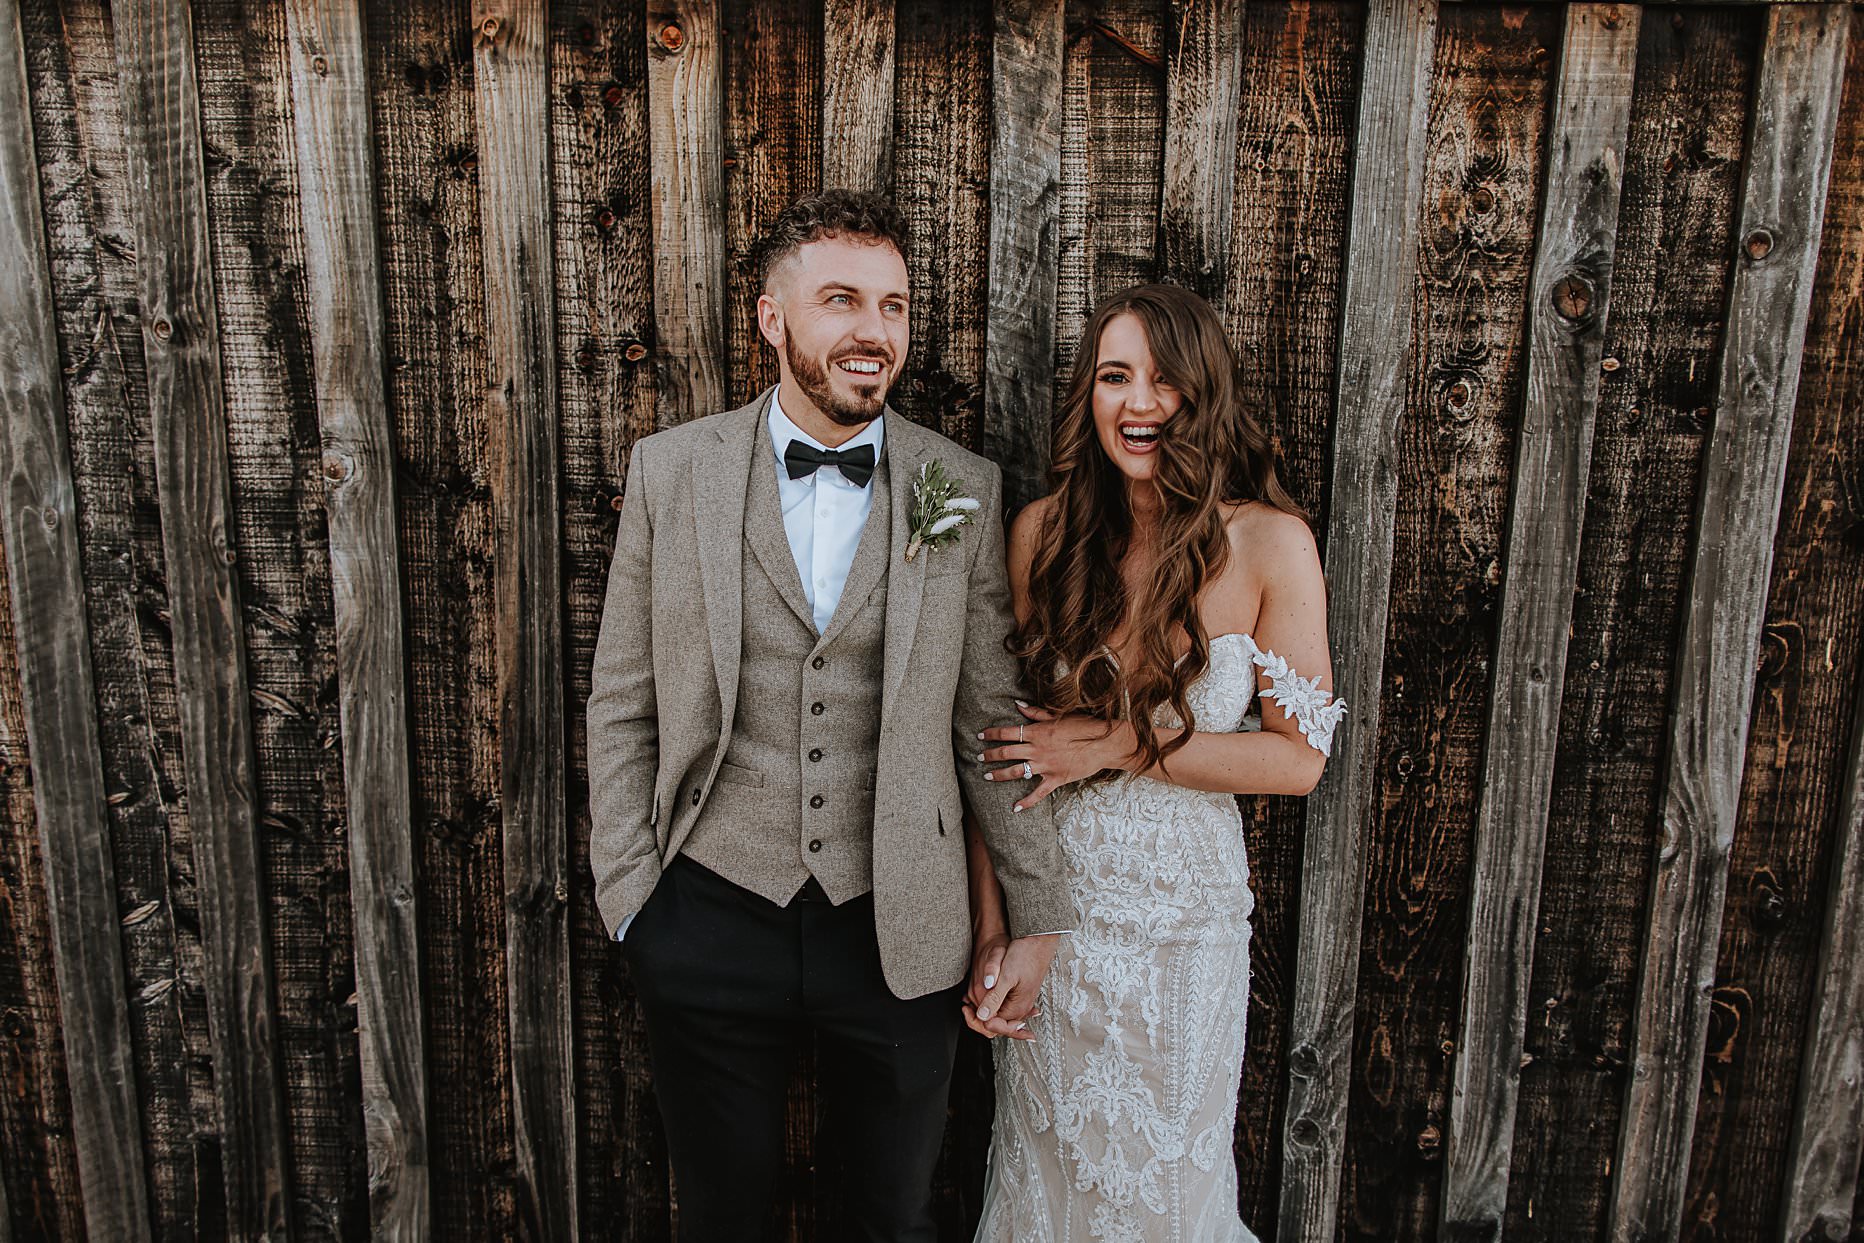 Bride and Groom leaning against wooden panelled wall. They are holding hands and laughing towards the camera. Bride has long brown hair and groom is wearing a bow tie.